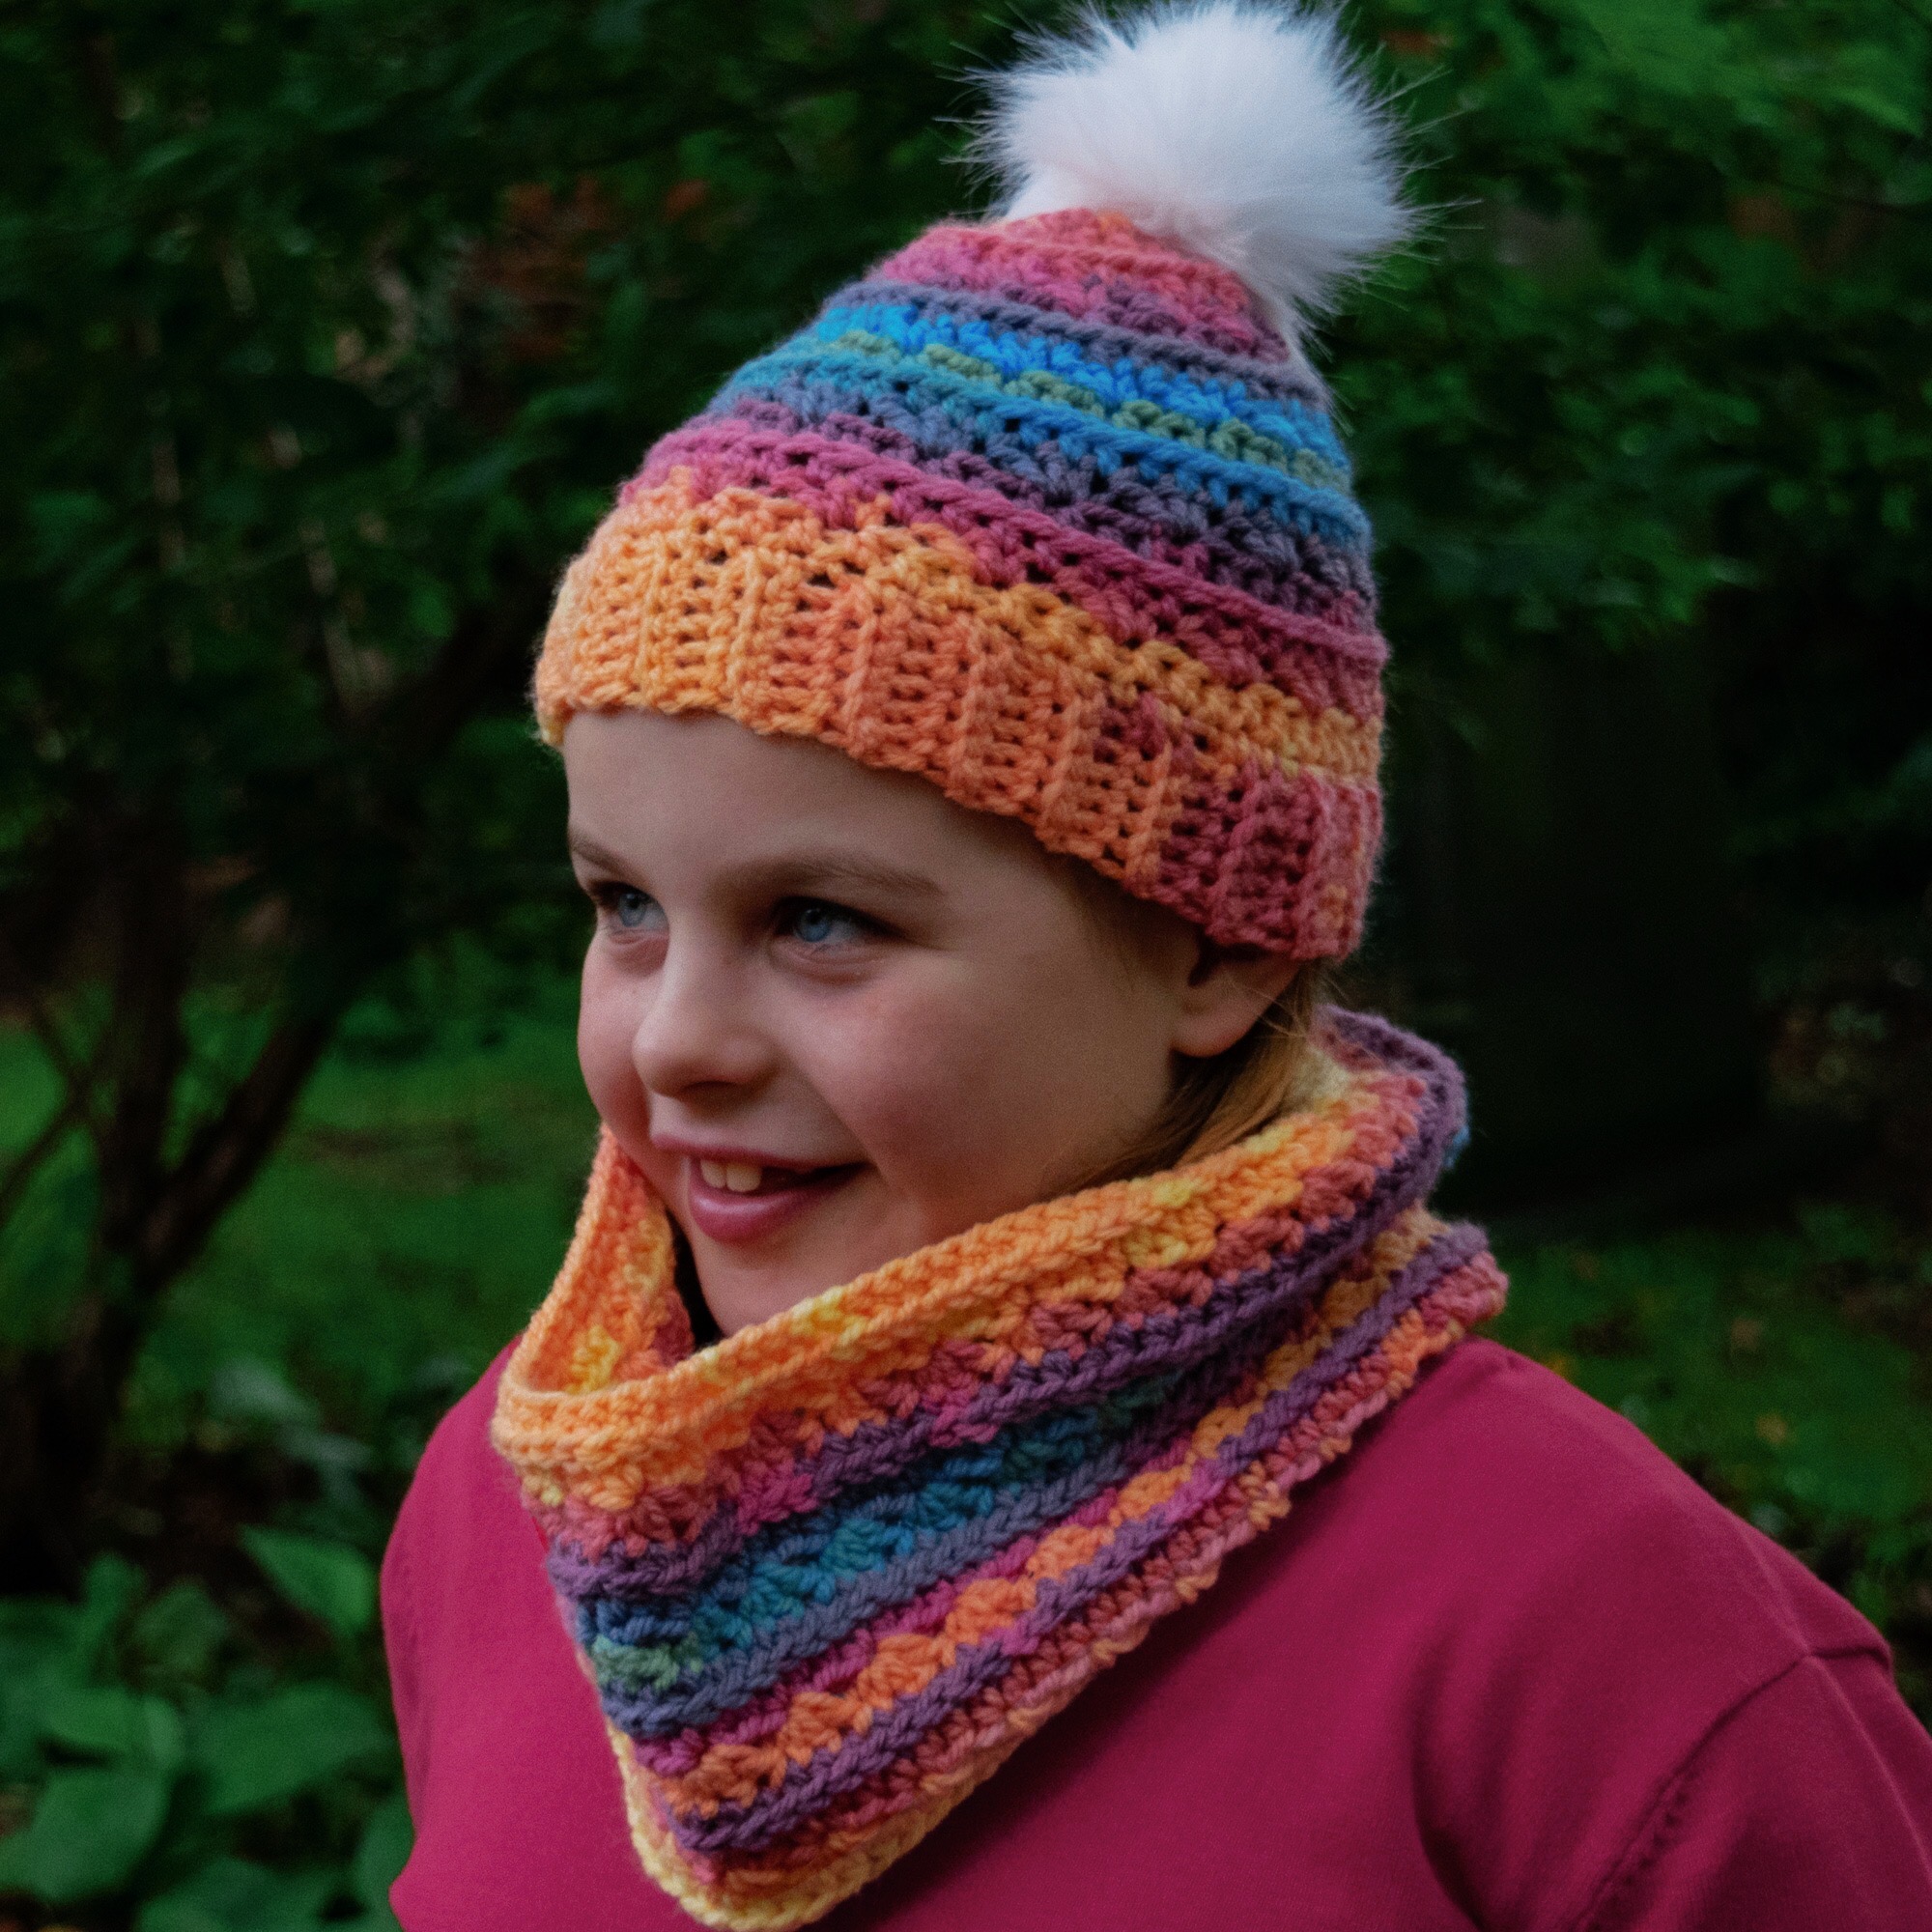 Cowl Pattern - Samantha's Hope cowl pattern perfectly matches the unisex beanie pattern